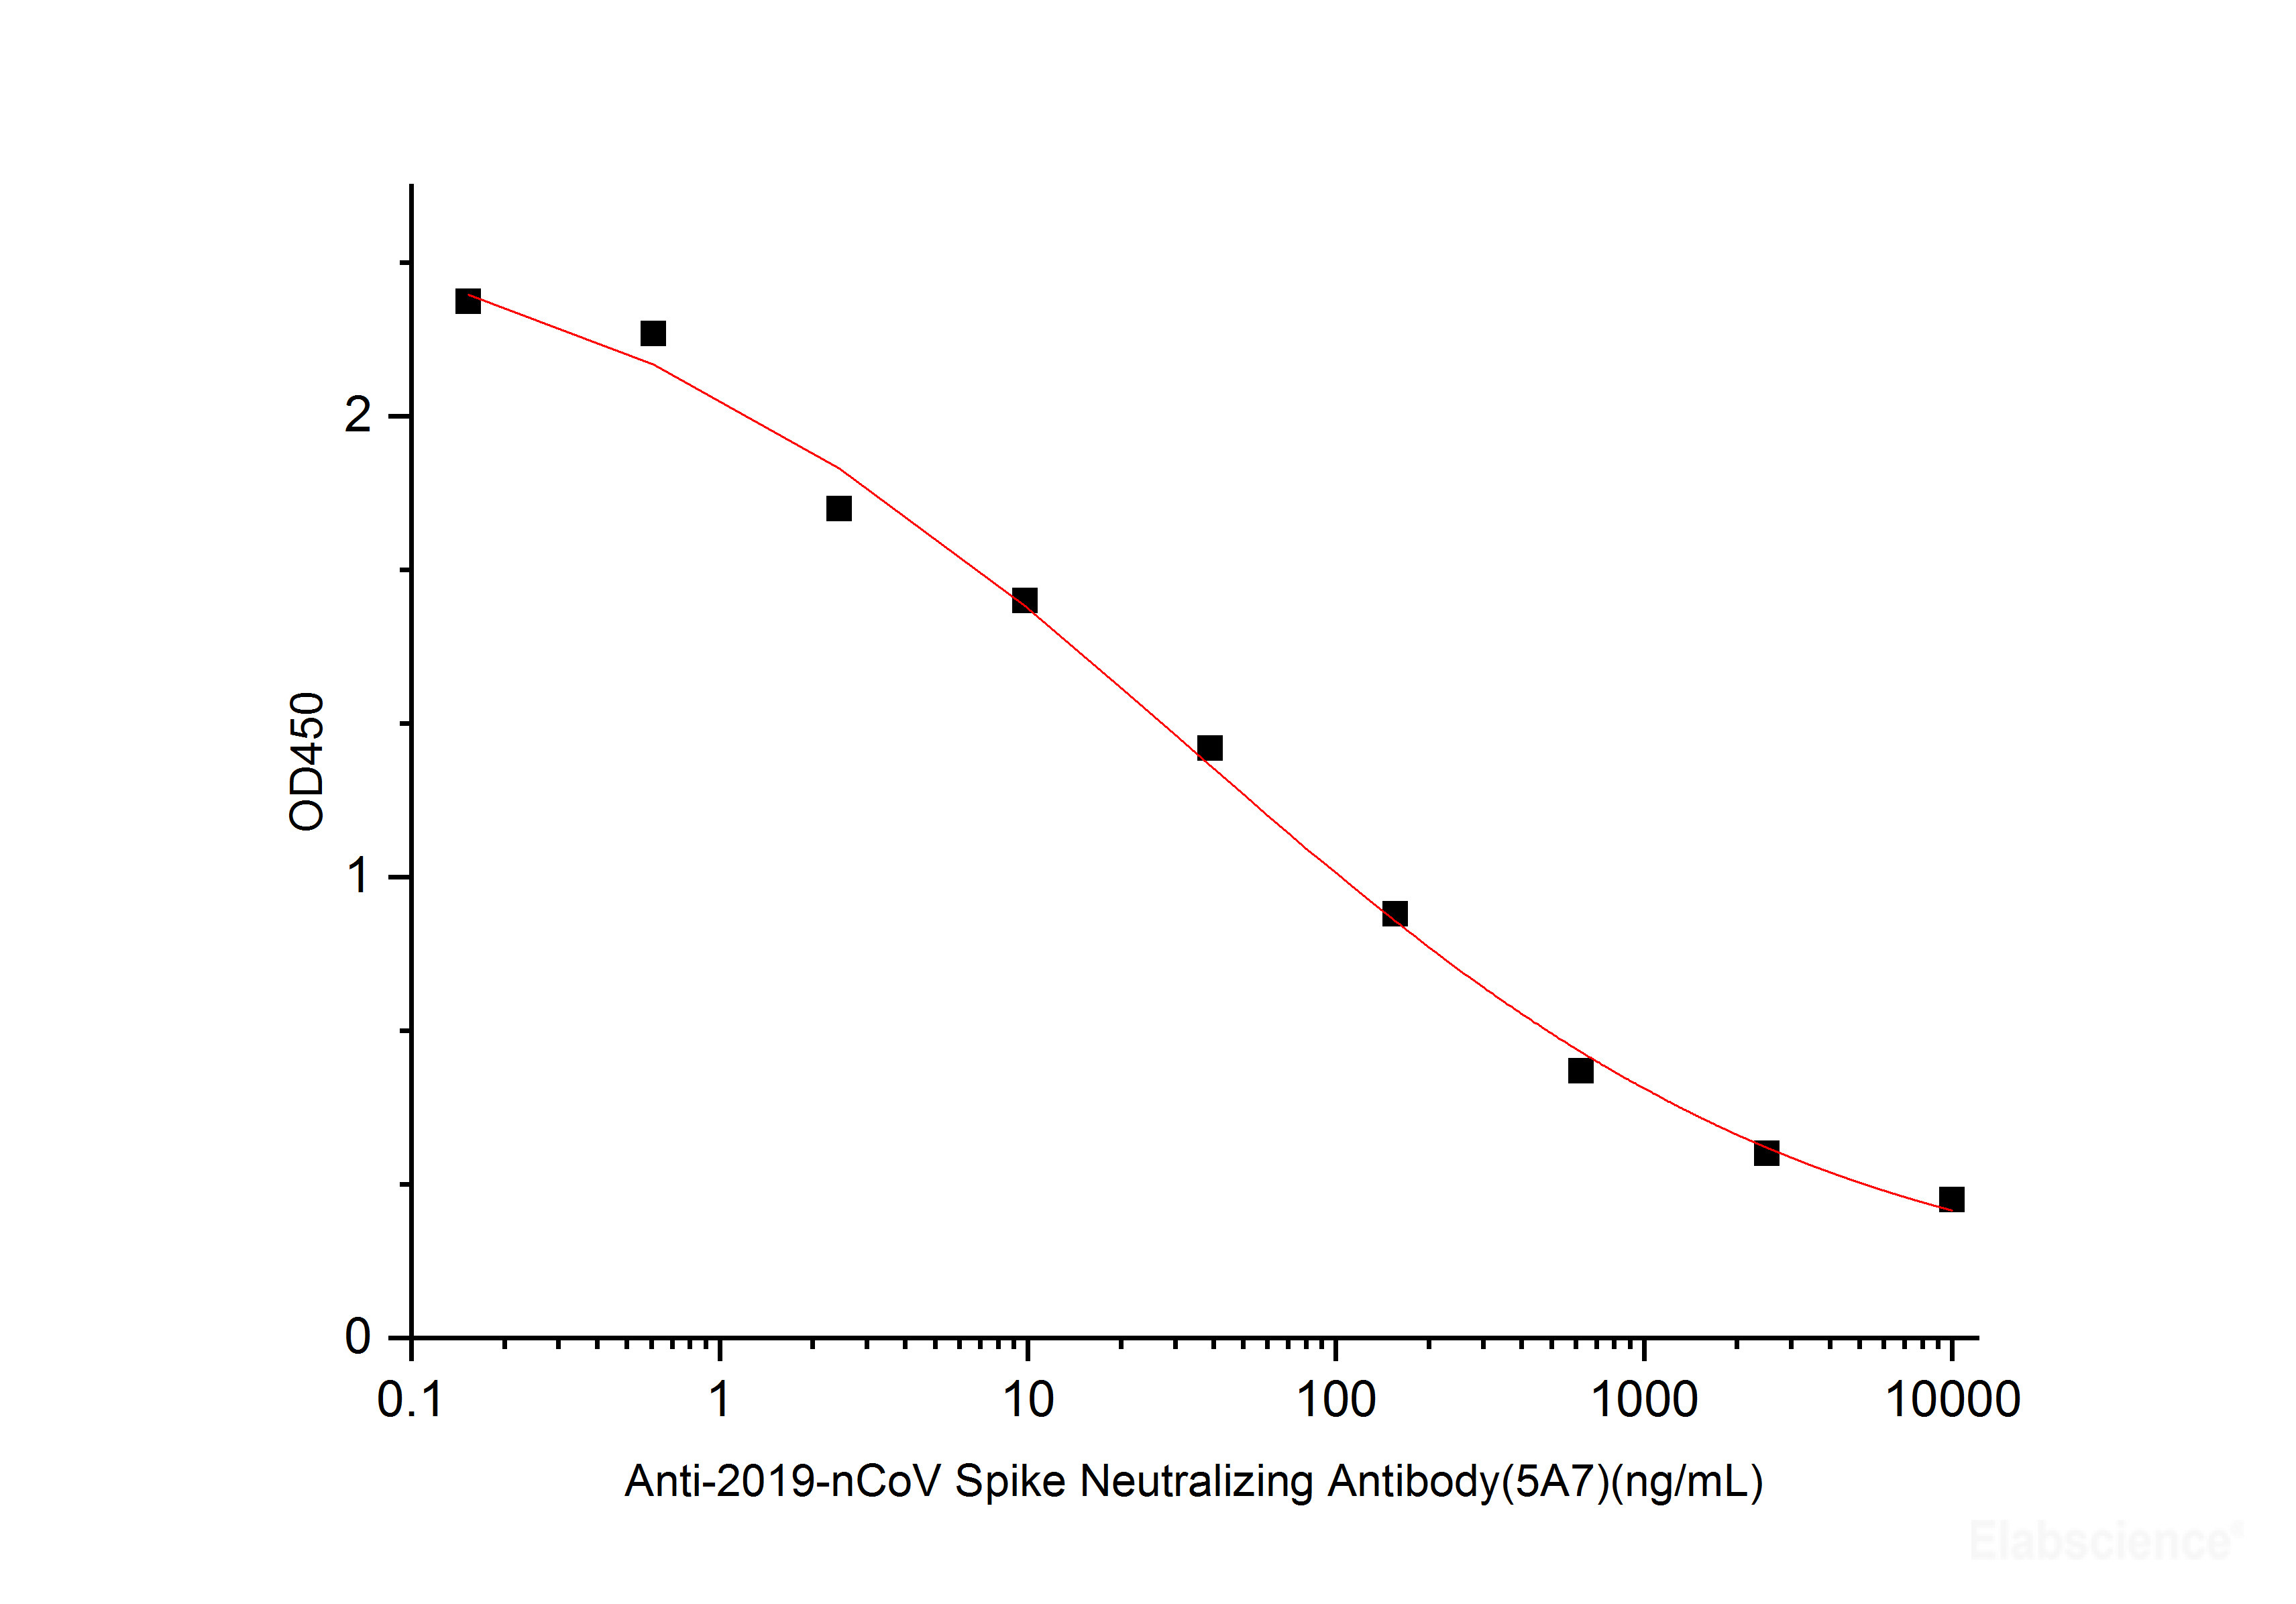 Anti-2019-nCoV Spike Neutralizing Antibody(5A7) can block Human ACE2 Protein (His Tag) and 2019-nCoV Spike Protein (RBD, mFc Tag) interaction, the IC50 for this effect is 231 ng/mL.